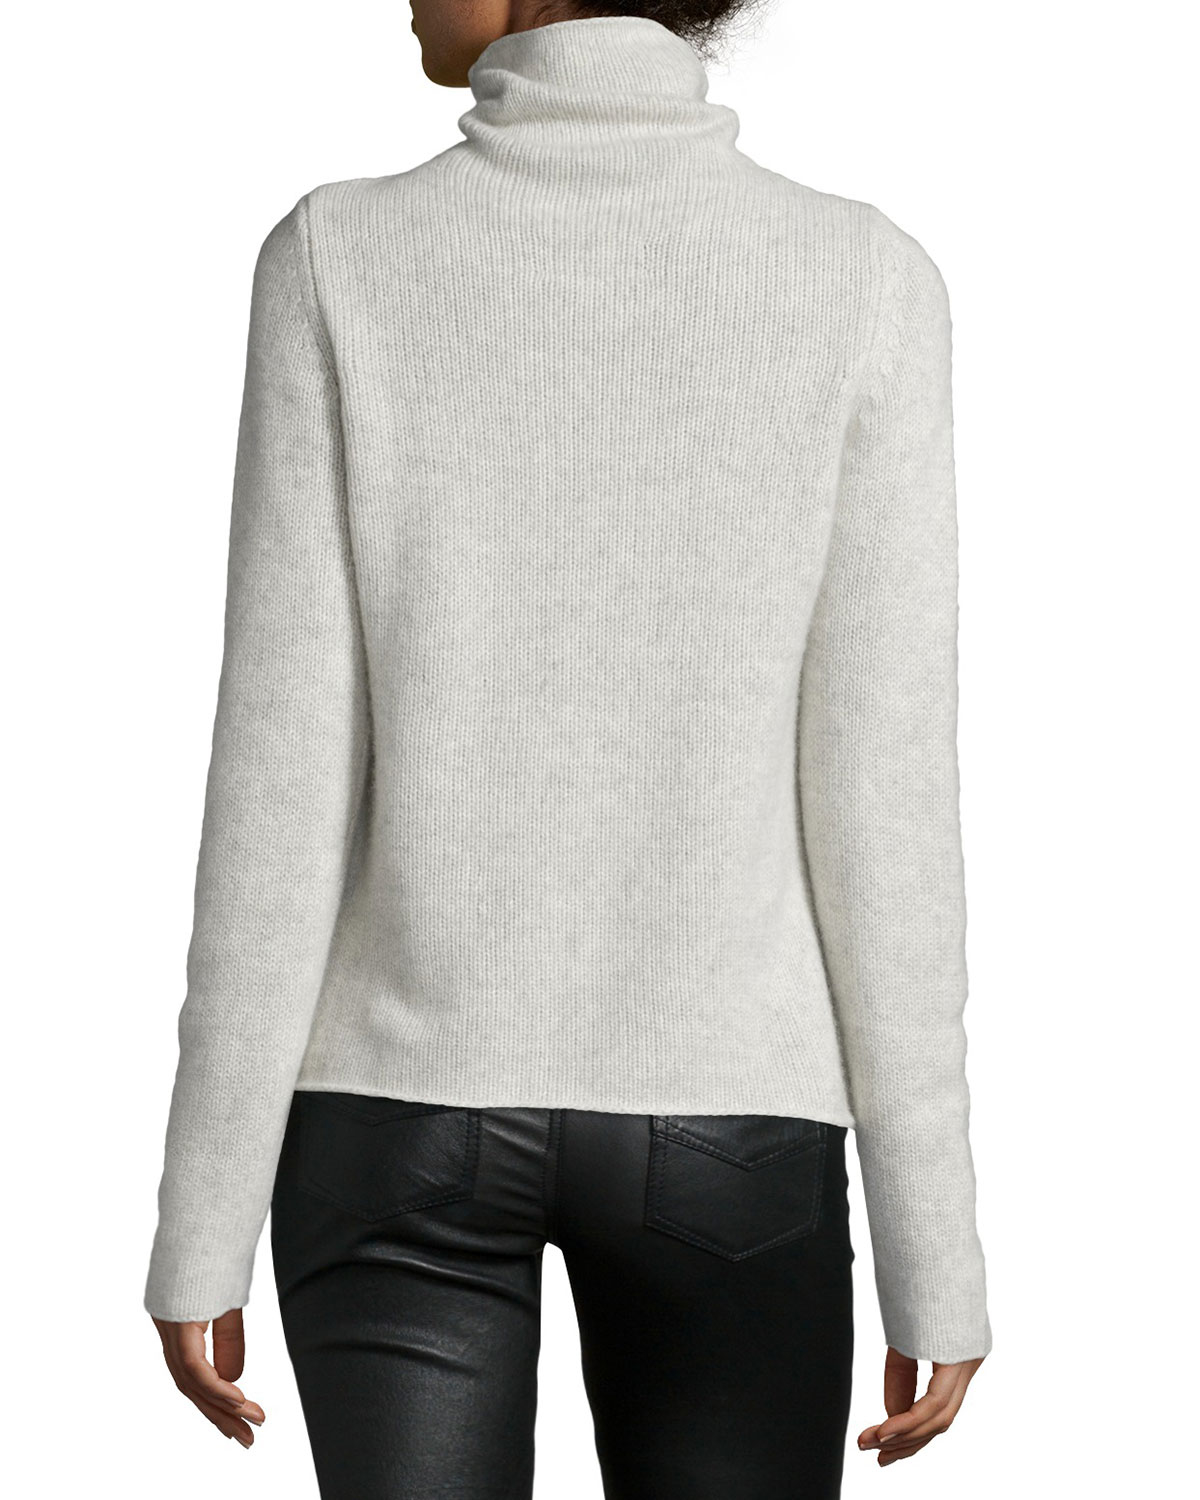 Zadig & Voltaire Crome Deluxe Cashmere Turtleneck Sweater in Gray - Lyst